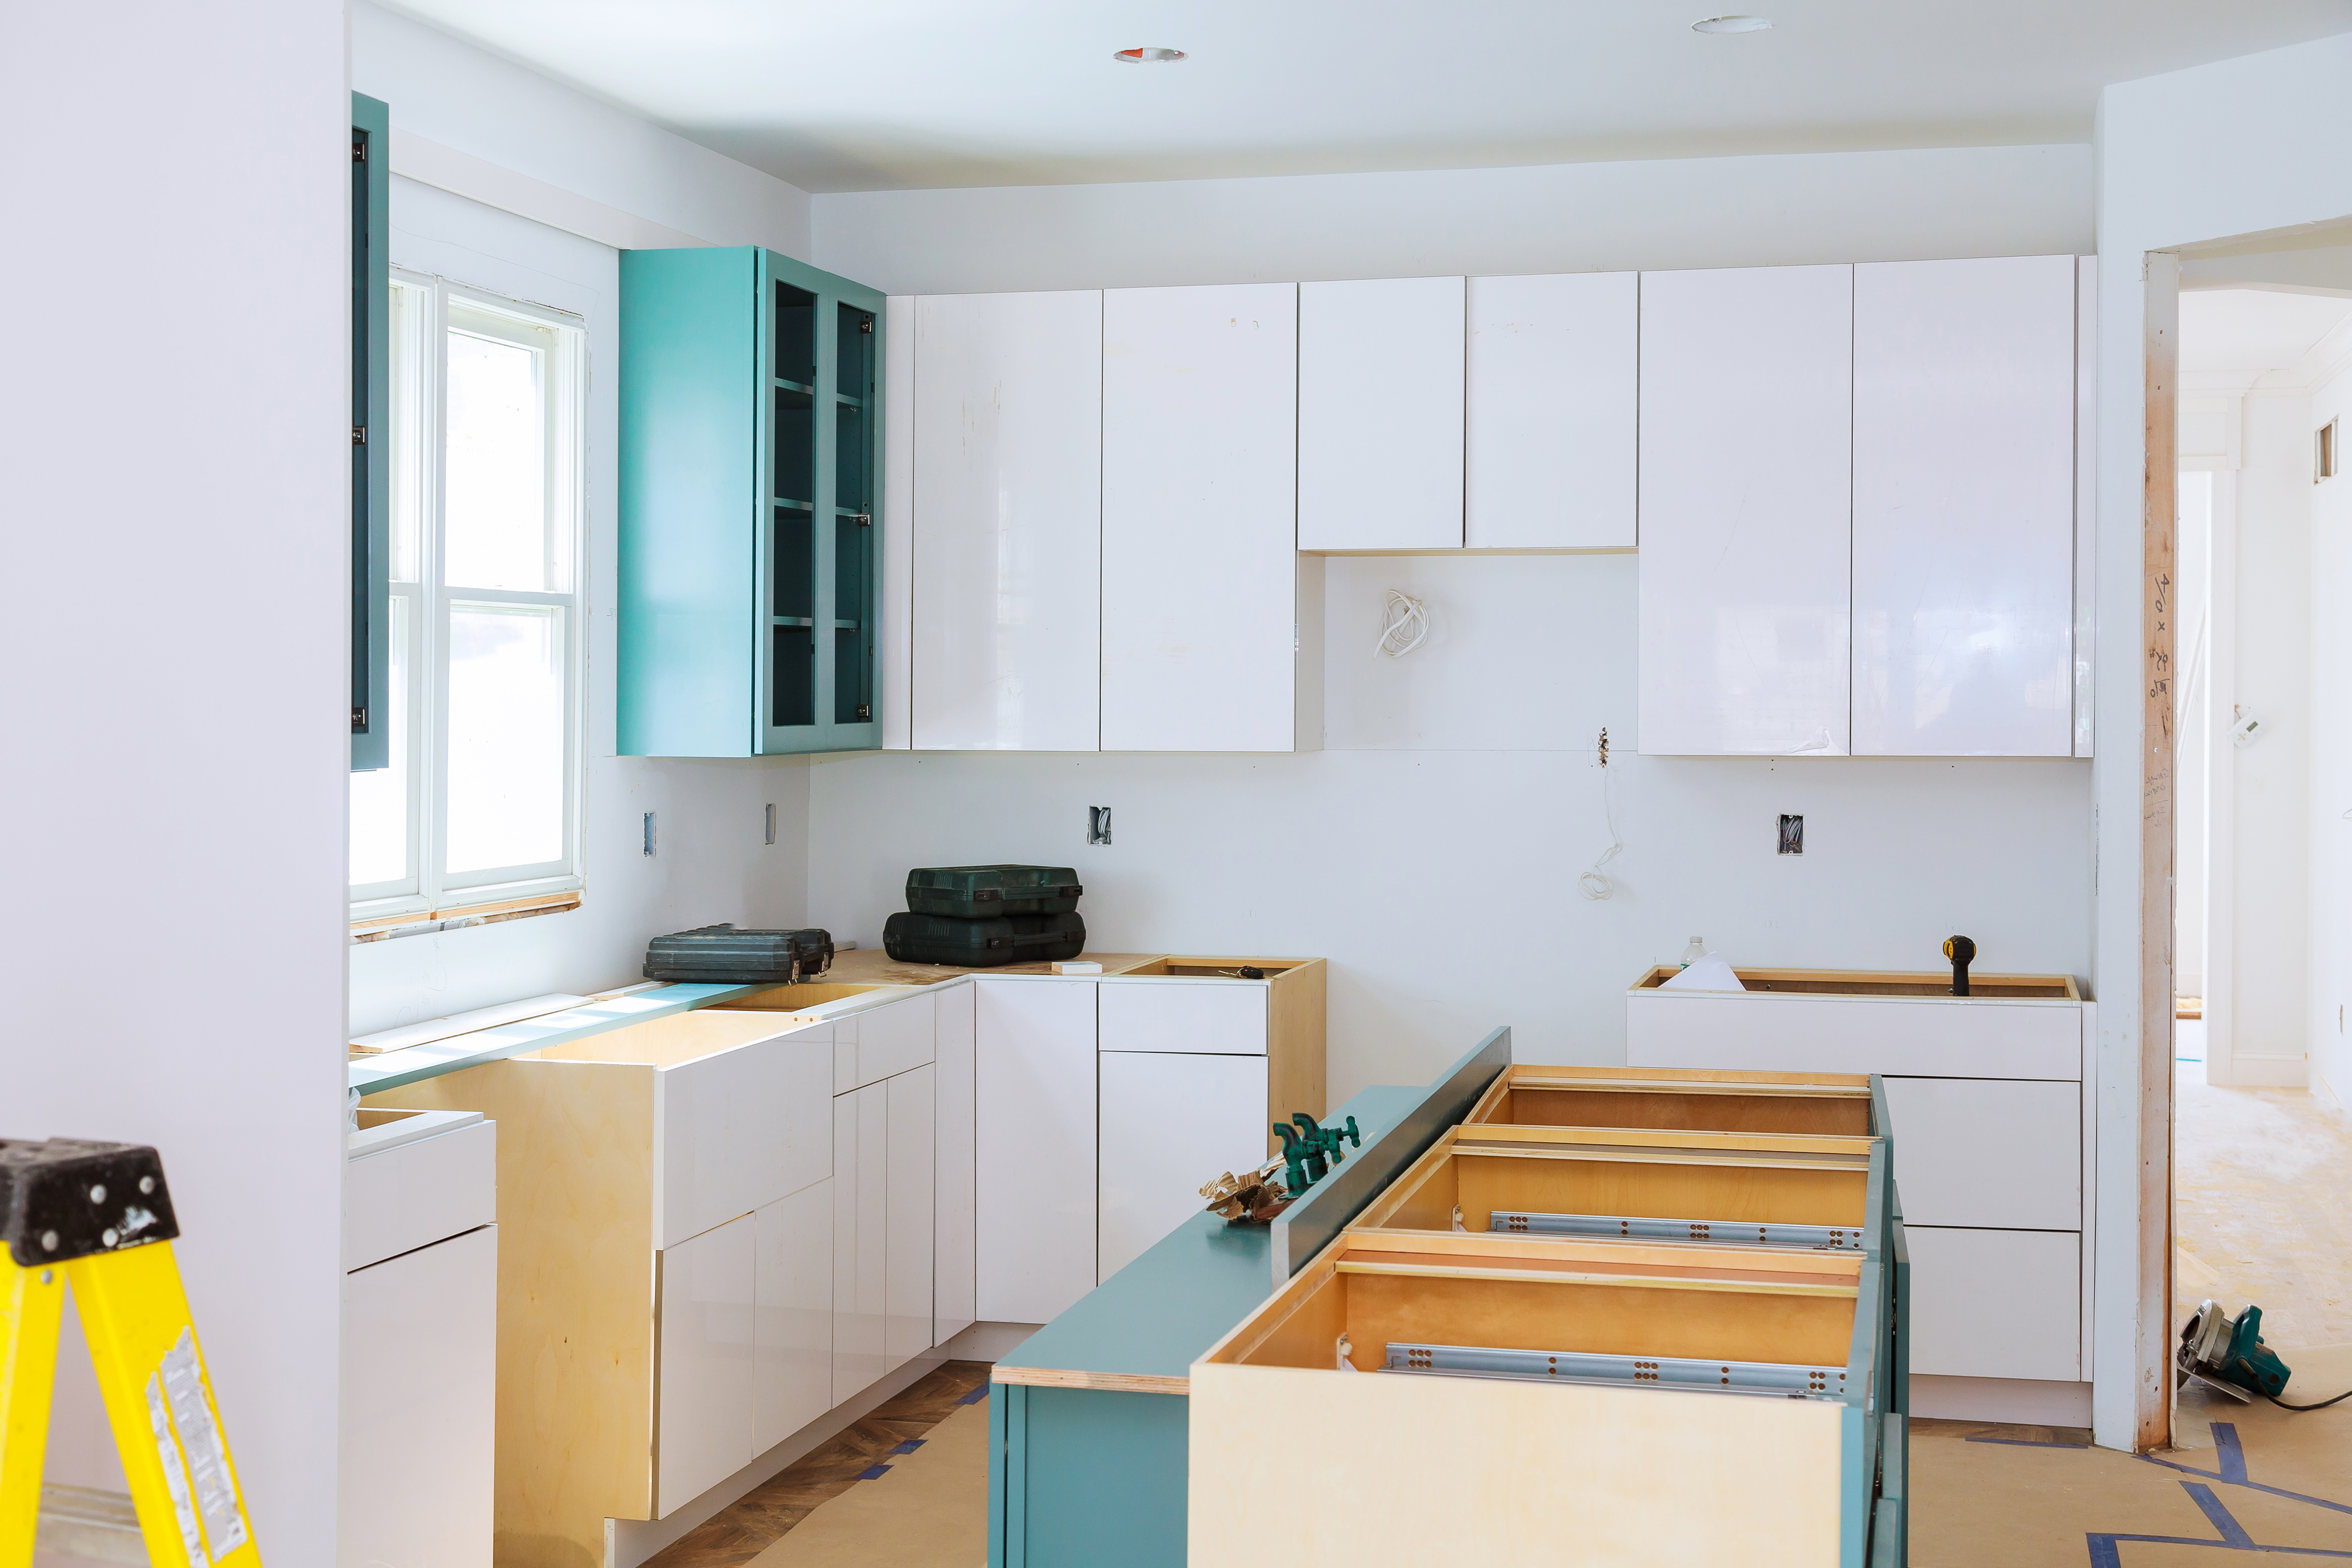 A condo kitchen in the process of remodeling | Source: Getty Images